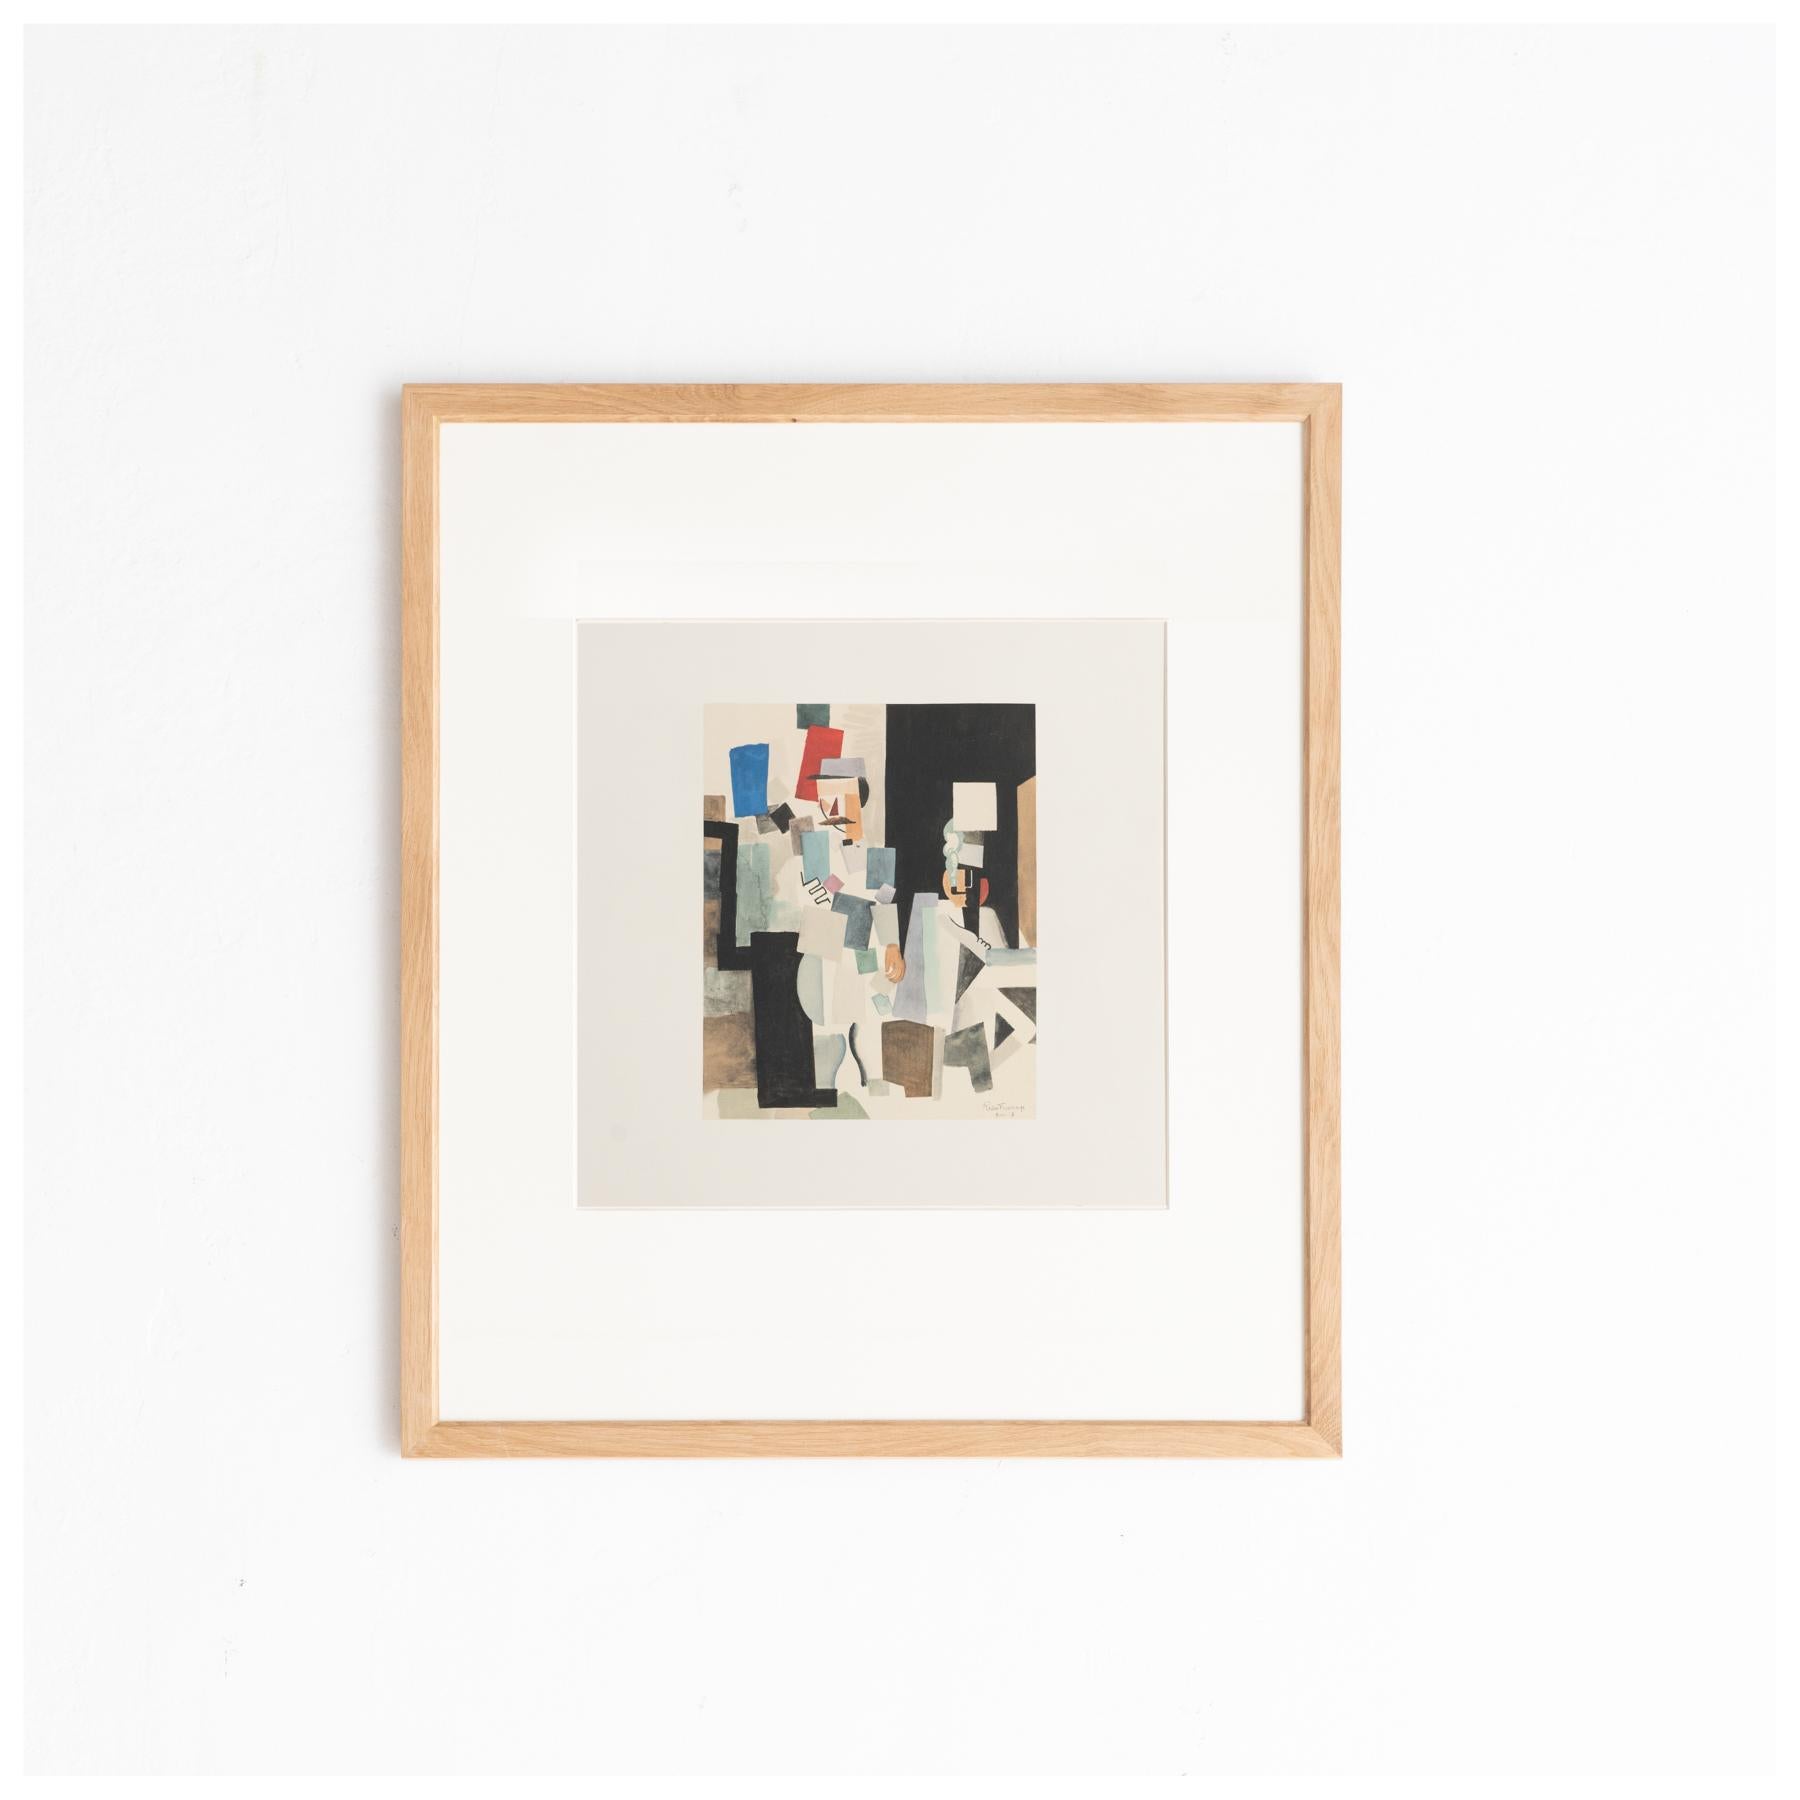 Original color lithograph 'Scene Militaire' by Roger de la Fresnaye.

Lithograph printed from an original painting made by the author in France, circa 1917.

Published in France by Fernand Mourlot, circa 1968. 

Framed and signed in the